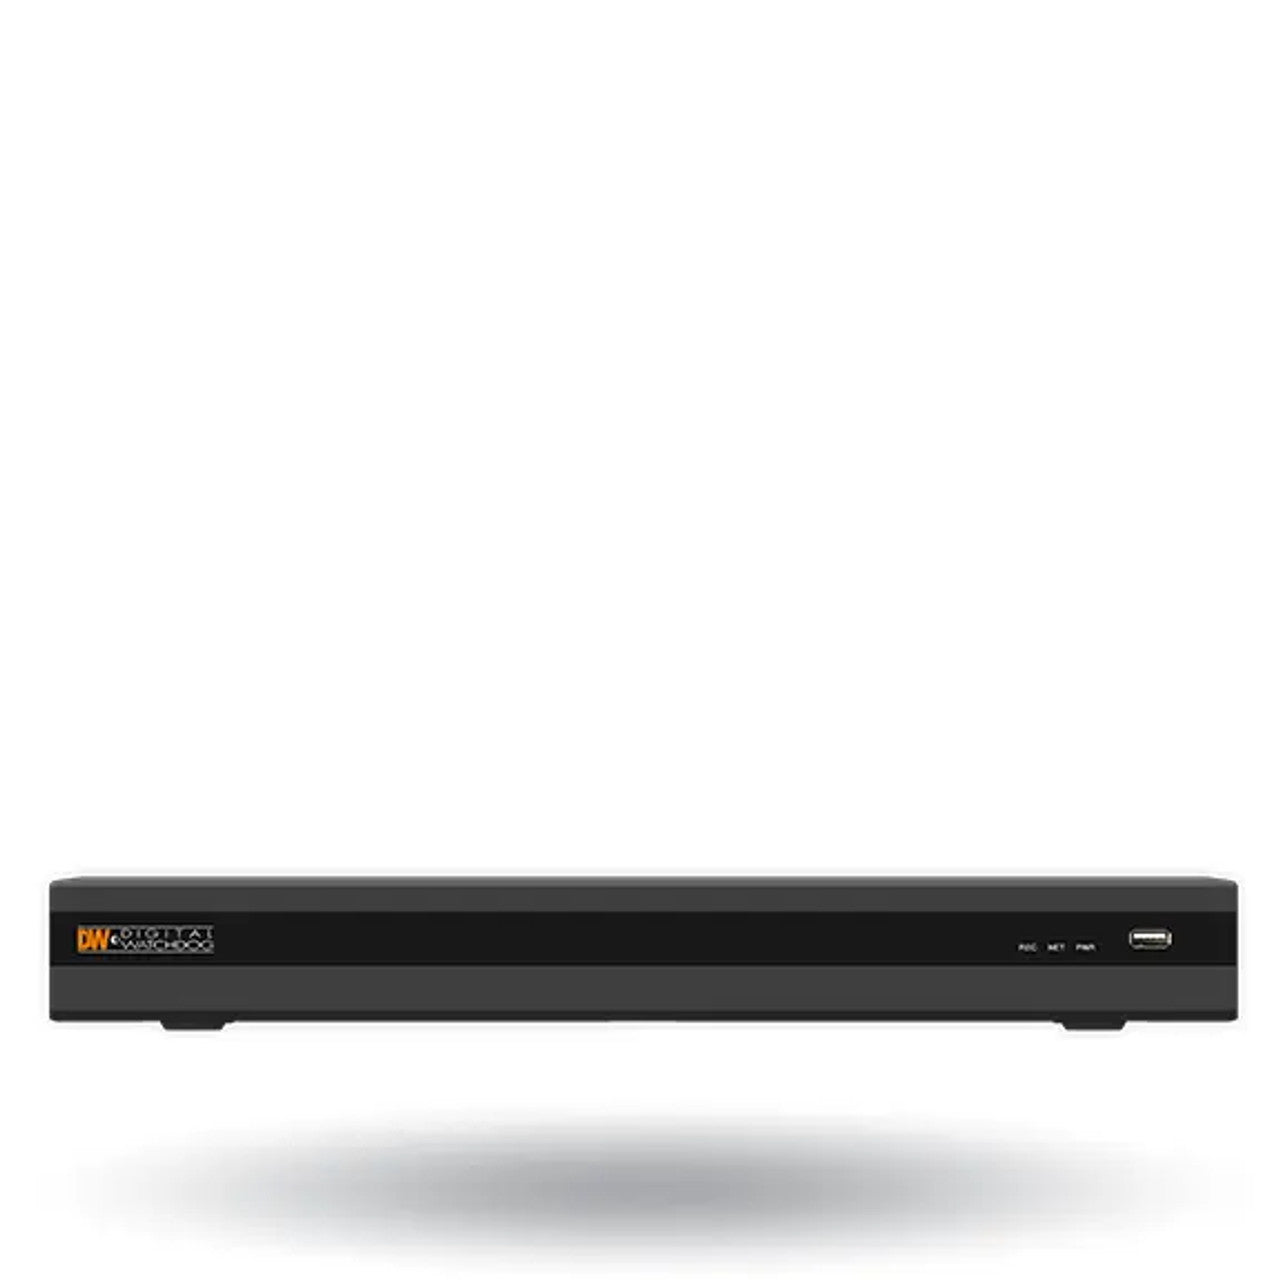 Digital Watchdog DW-VG4128P 8 Channel PoE NVR with 4 bonus channels, No Hard Drive Included, 12-Channel